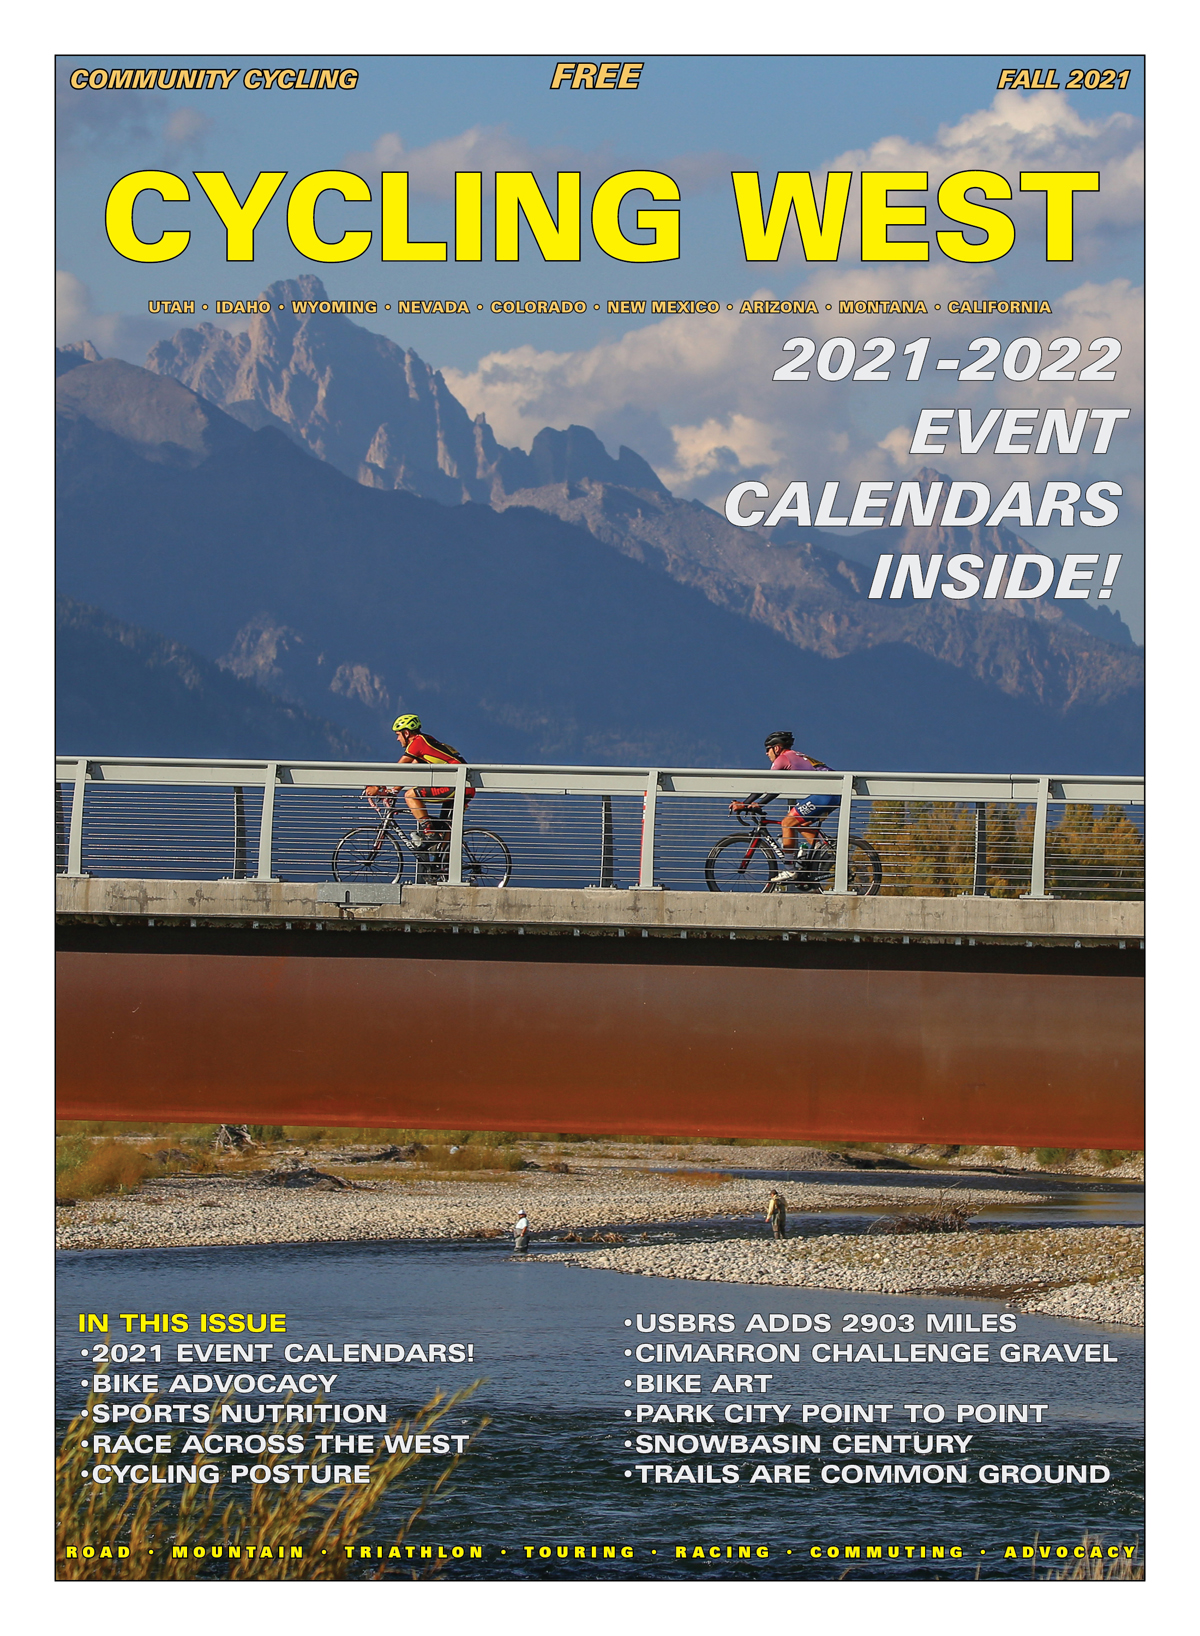 Cycling West Fall 2021 Cover Photo: Riders cross over Snake River on the bike/ped bridge in Wilson, Wyoming in the 2021 Lotoja Classic, just a few miles from the finish. Find your photo online at snakeriverphoto.com Photo by Nigel May, Snake River Photo